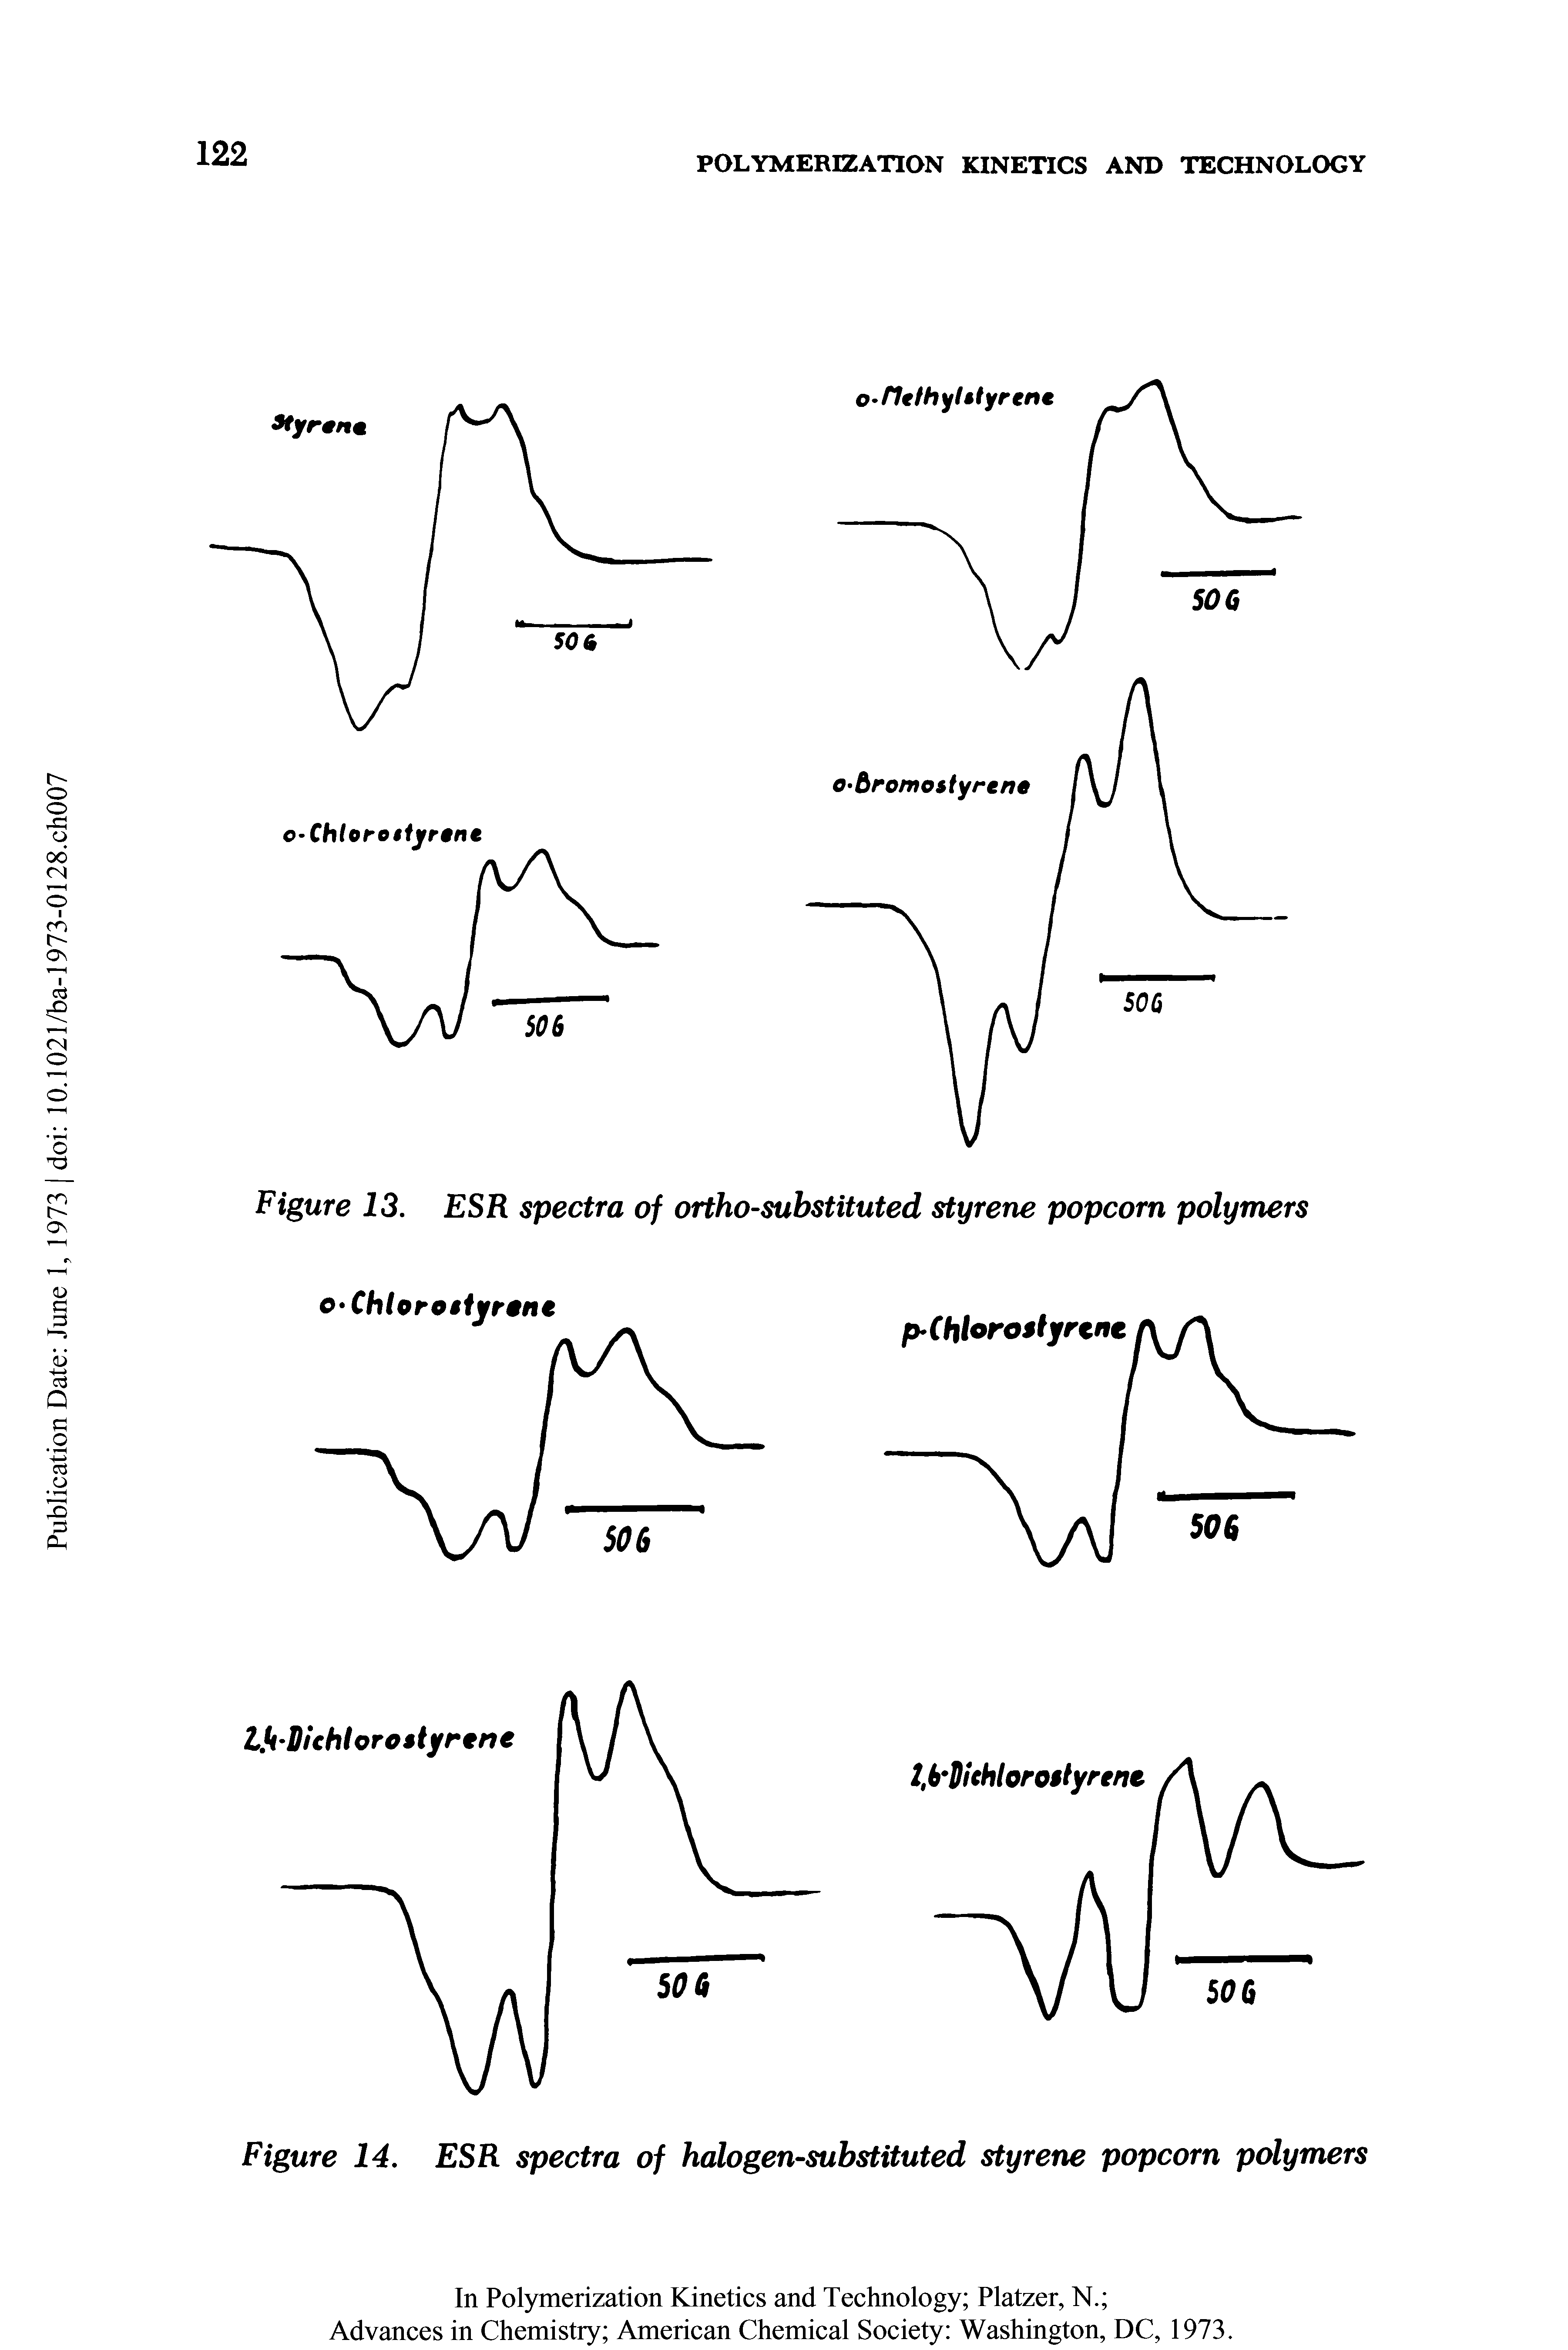 Figure 13. ESR spectra of ortho-substituted styrene popcorn polymers...